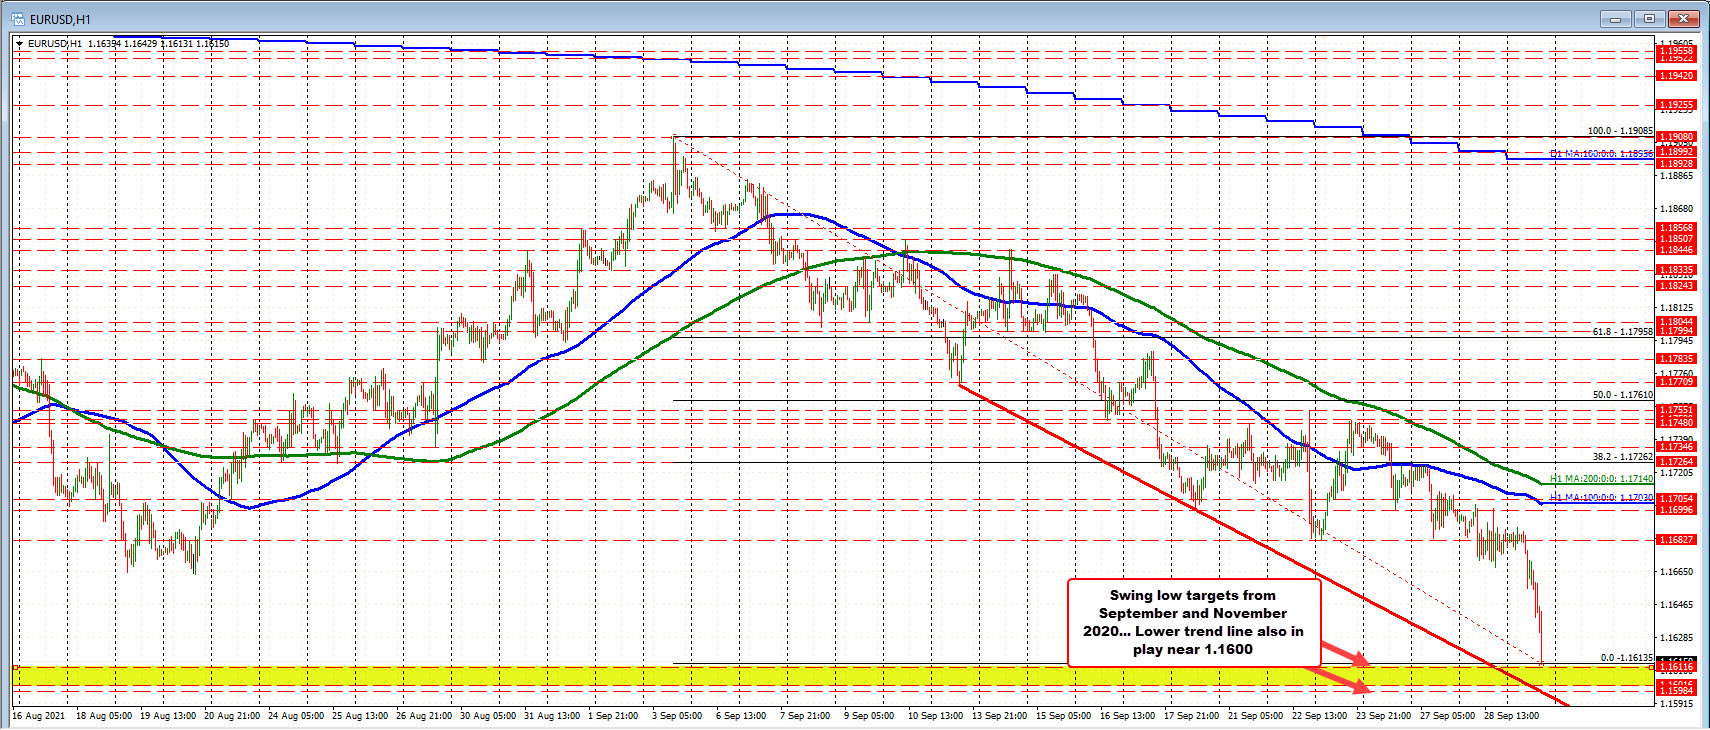 EURUSD on the hourly chart is approaching a lower trendline as well